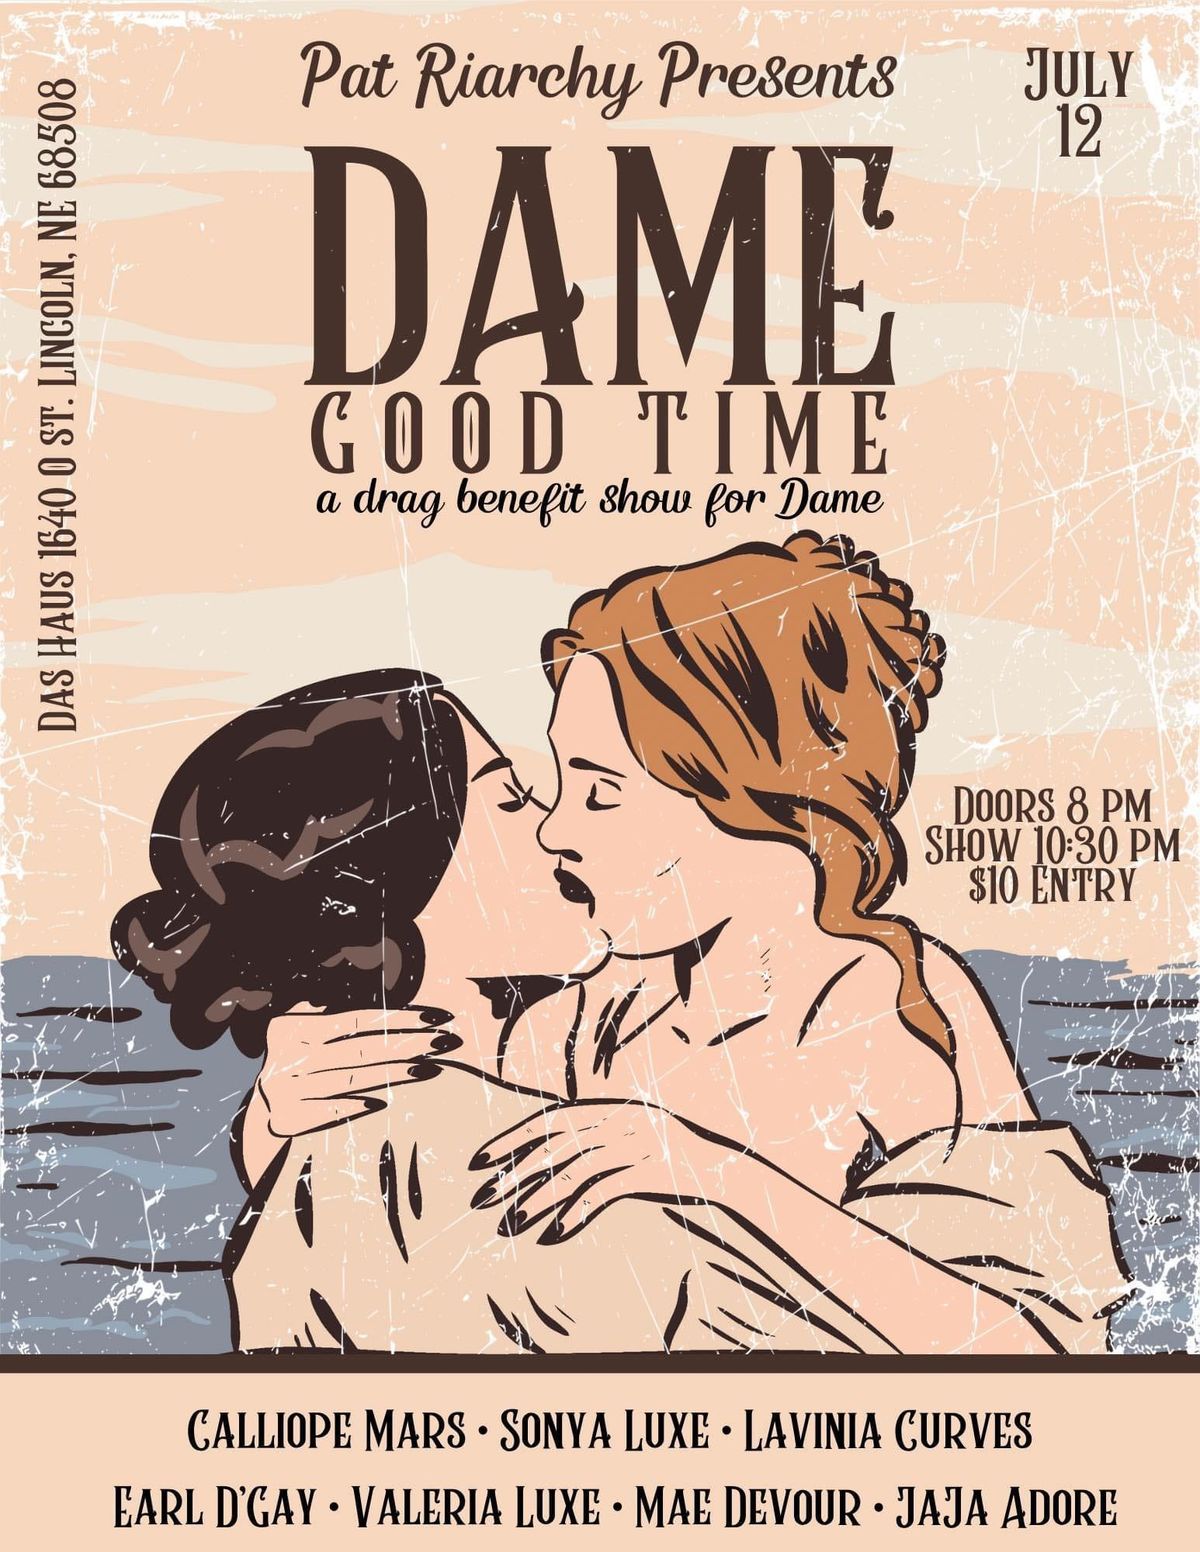 DAME Good Time: A Benefit For Dame